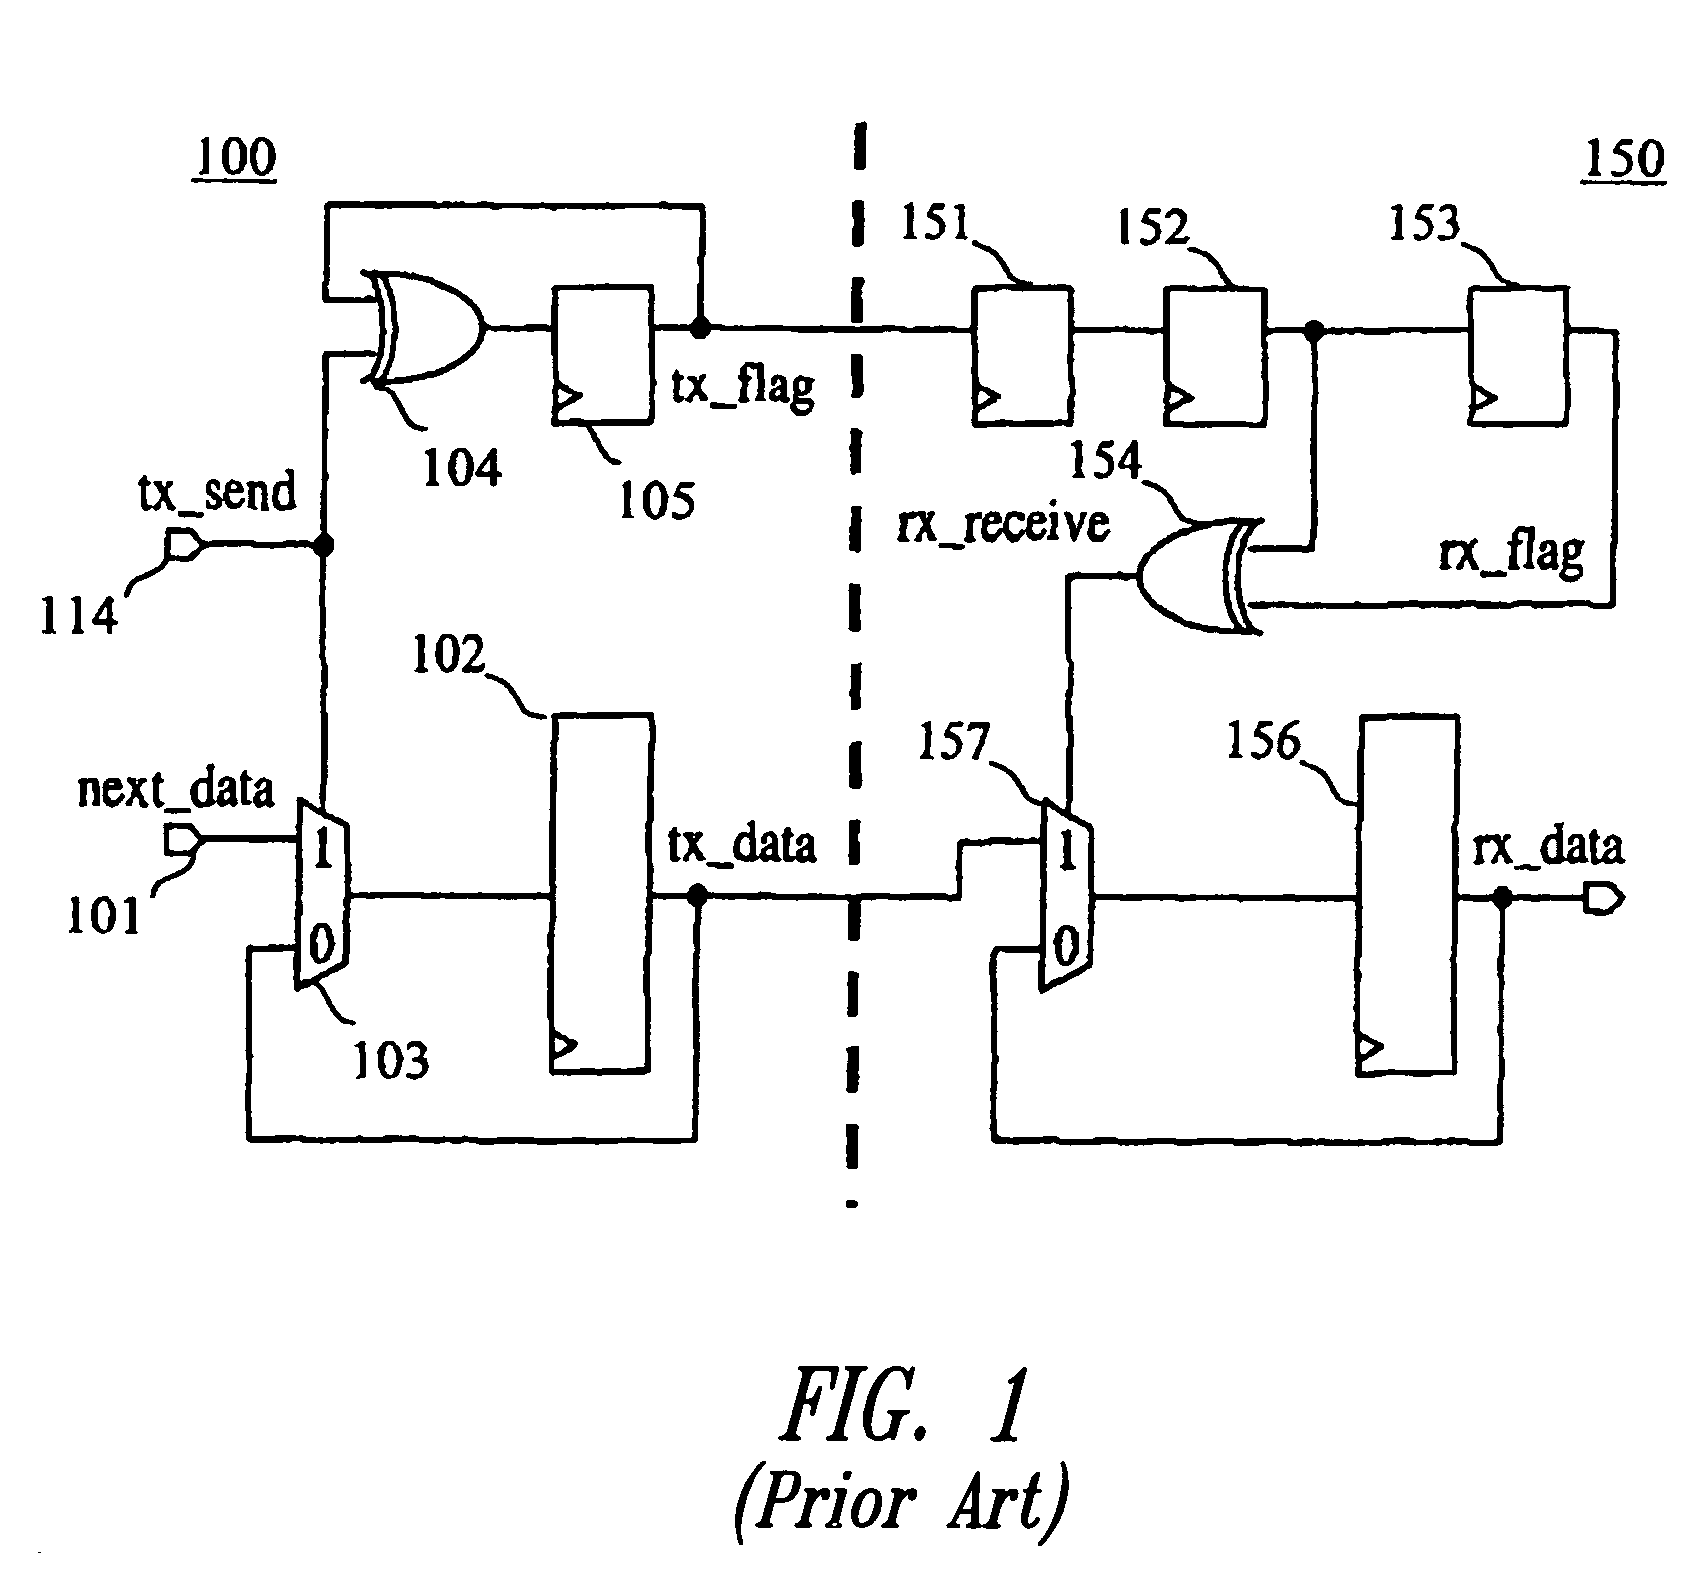 Device for transferring data via write or read pointers between two asynchronous subsystems having a buffer memory and plurality of shadow registers